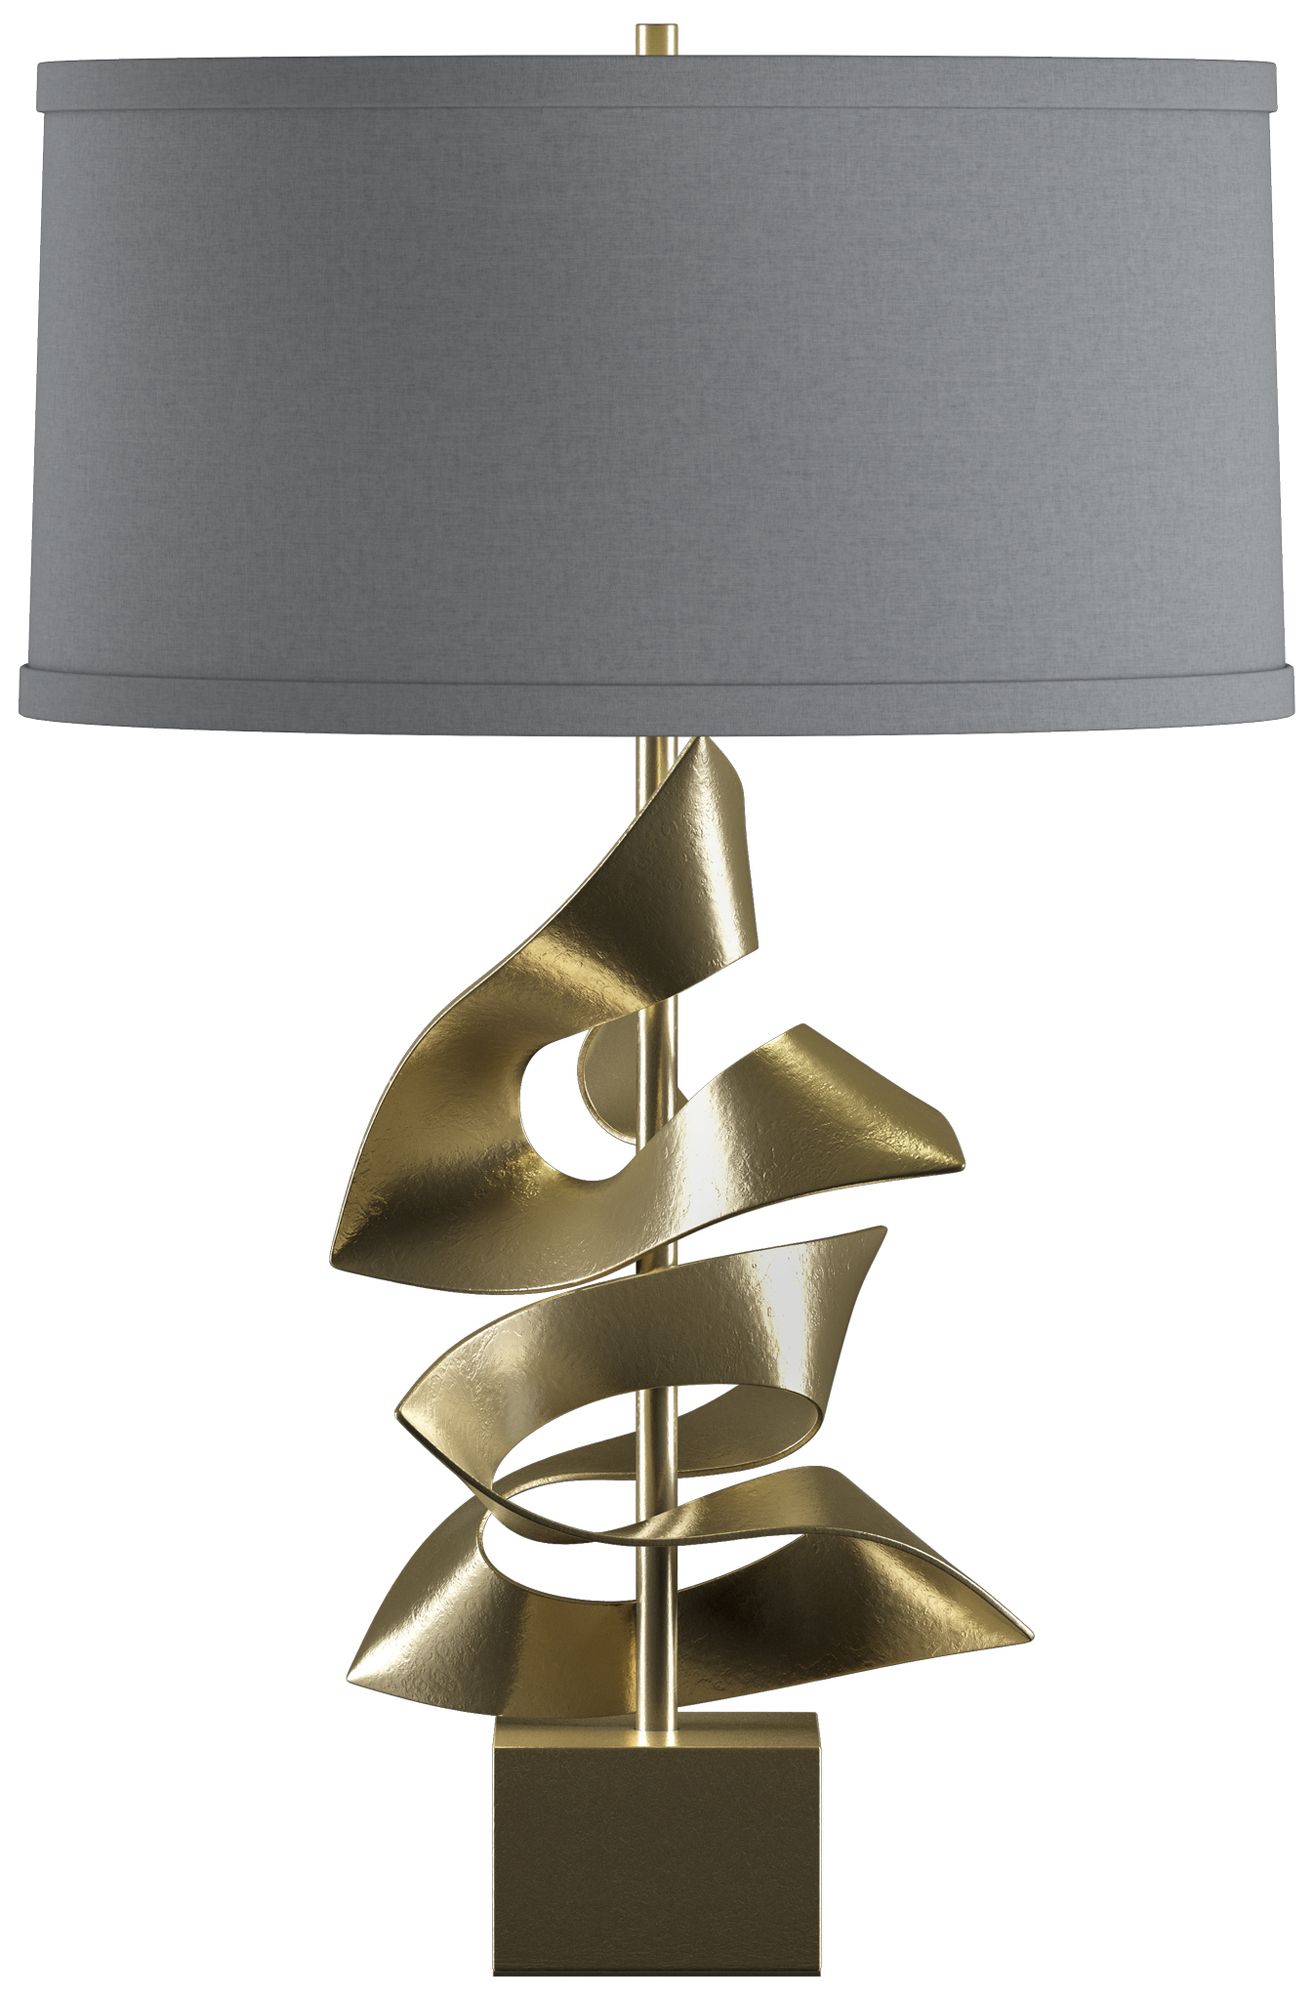 Gallery 24.7"H Modern Brass Twofold Table Lamp With Medium Grey Shade